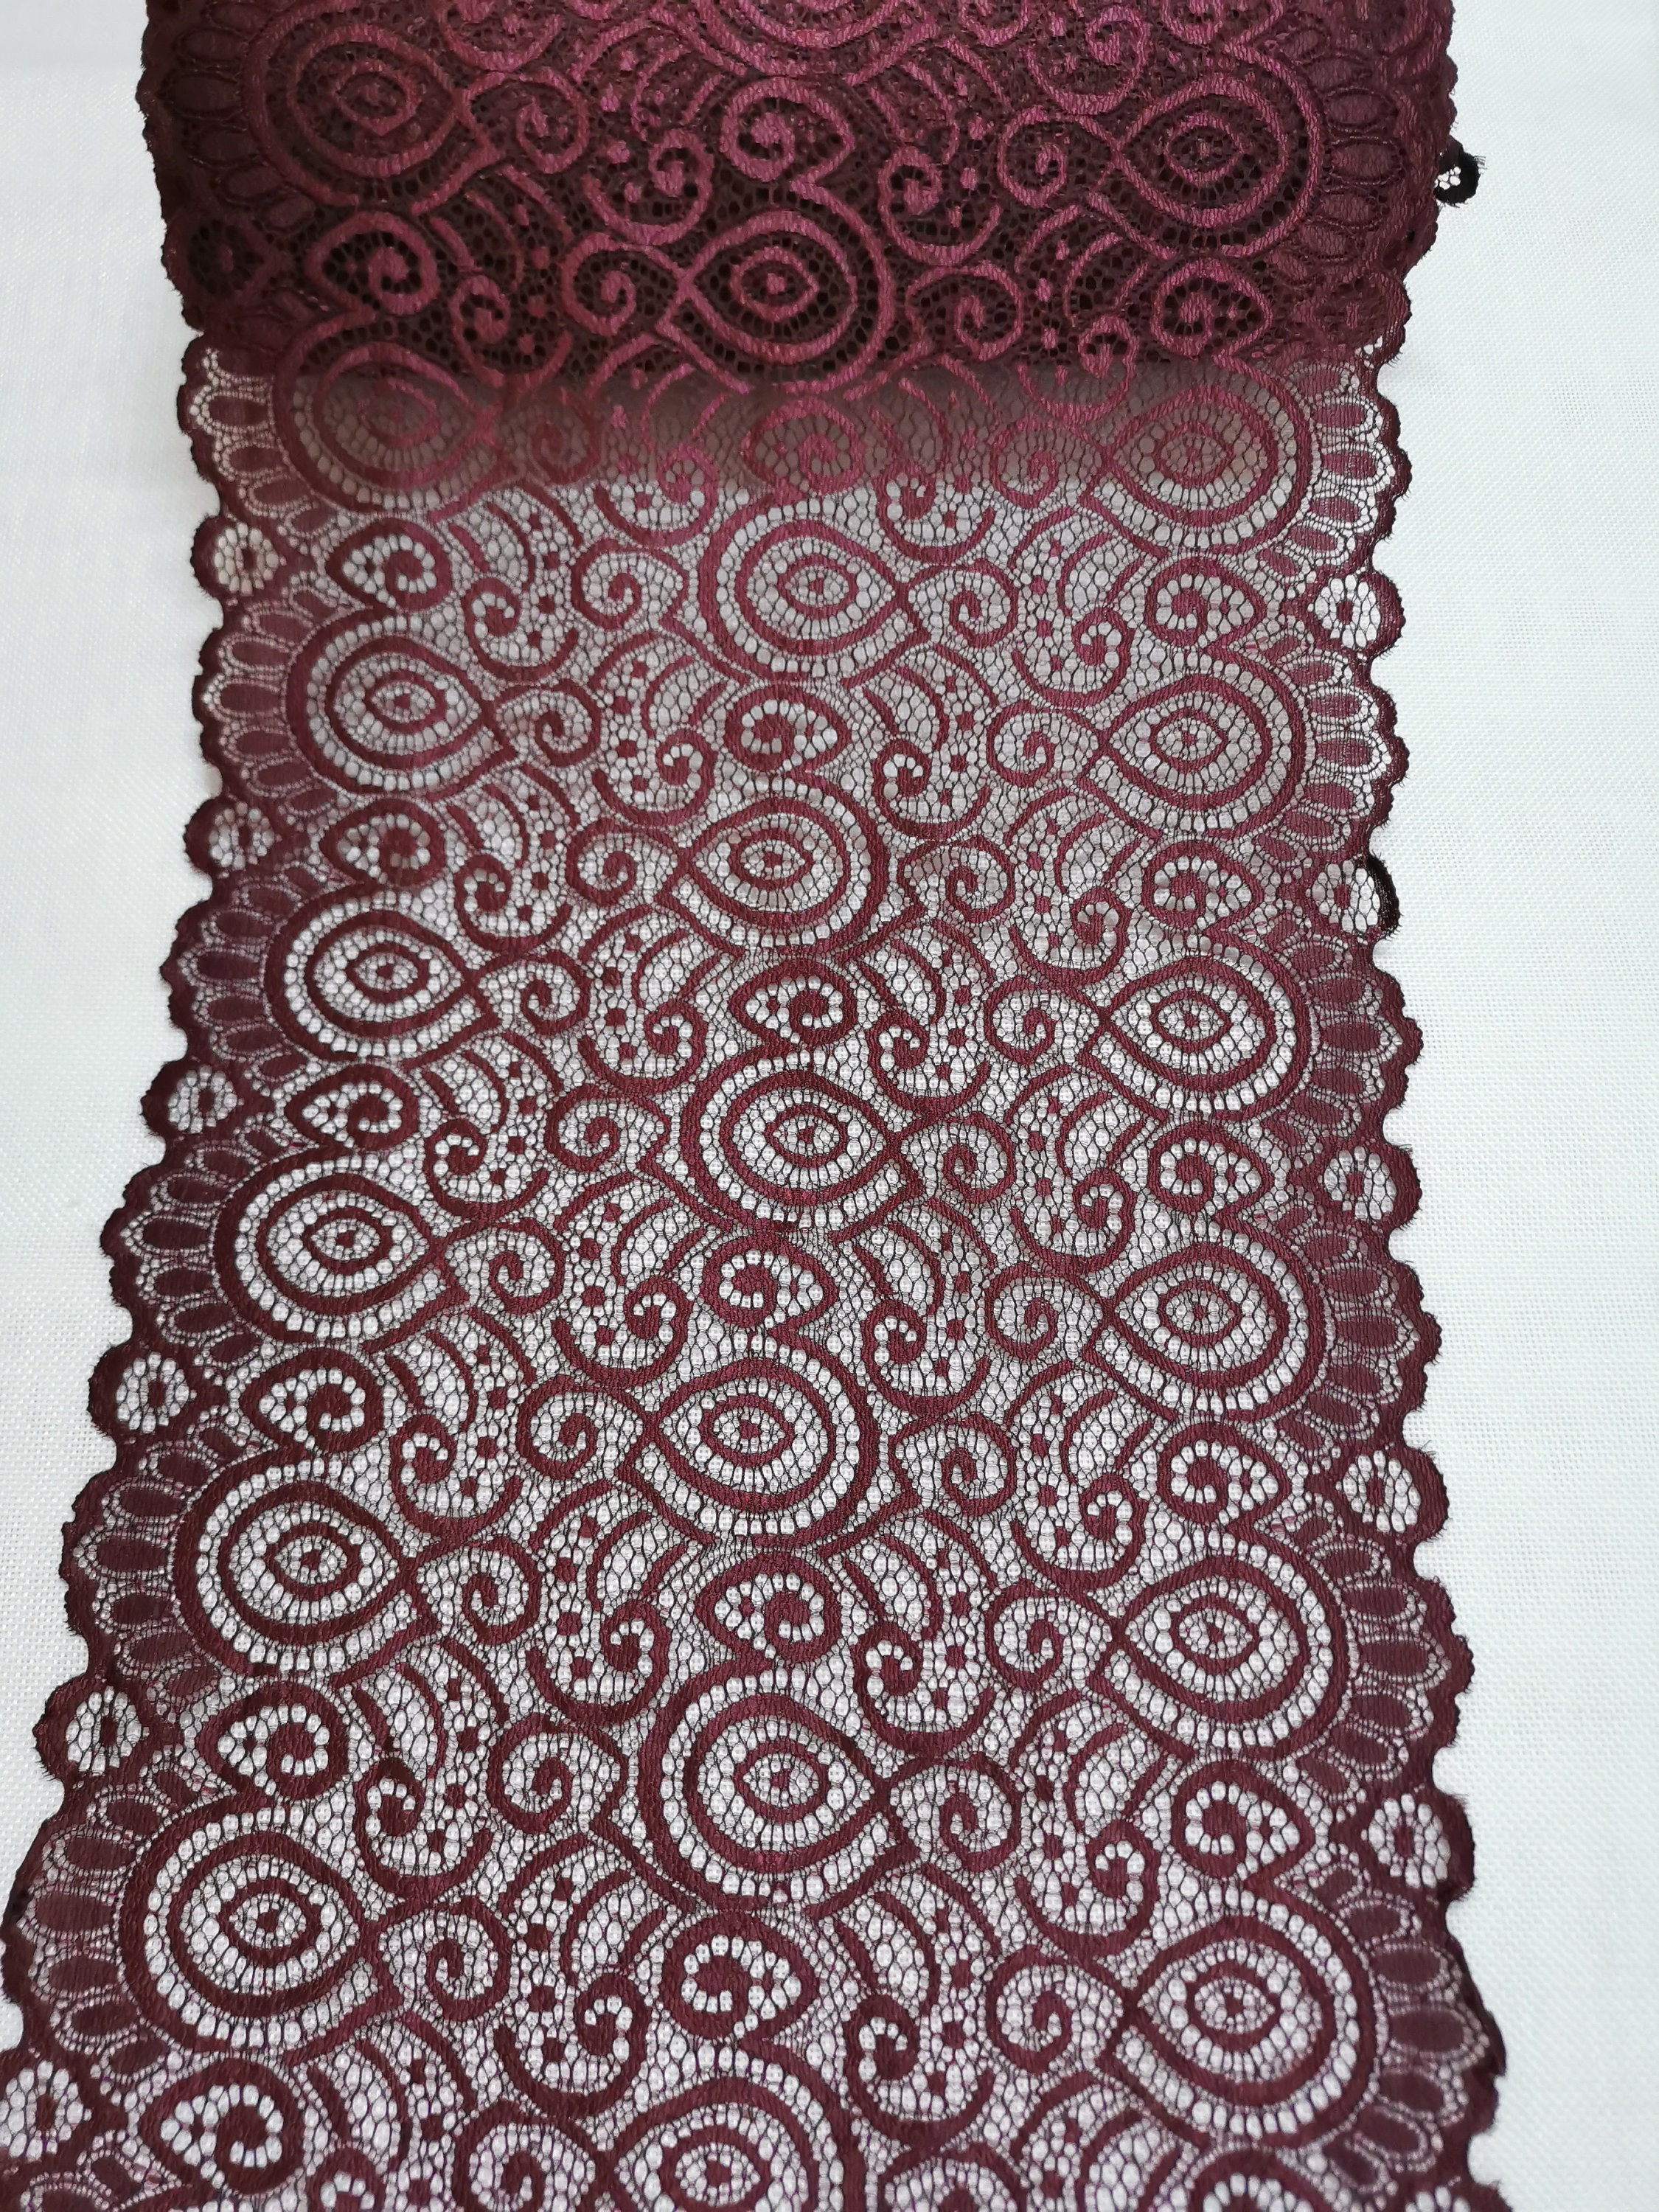 Burgundy Wide Stretch Lace Trim for Lingerie Burgundy Lace Stretch Lace to  Sew 12 Wdie Stretch Lace Trim Lingerie by the Yard 